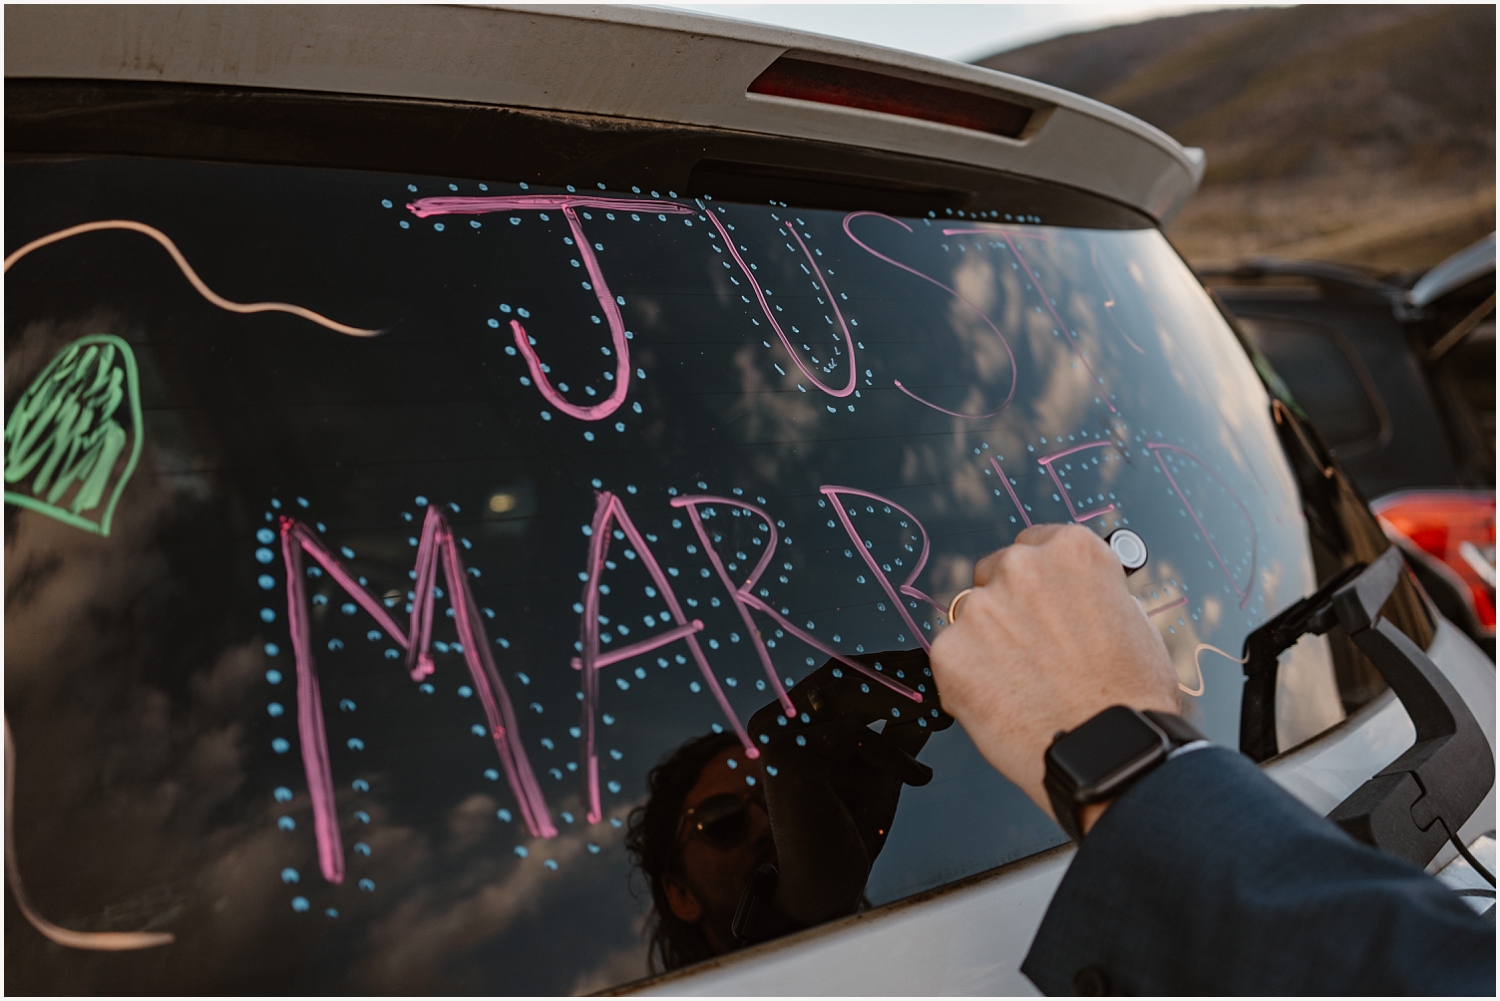 Couple writes just married on their car after elopement